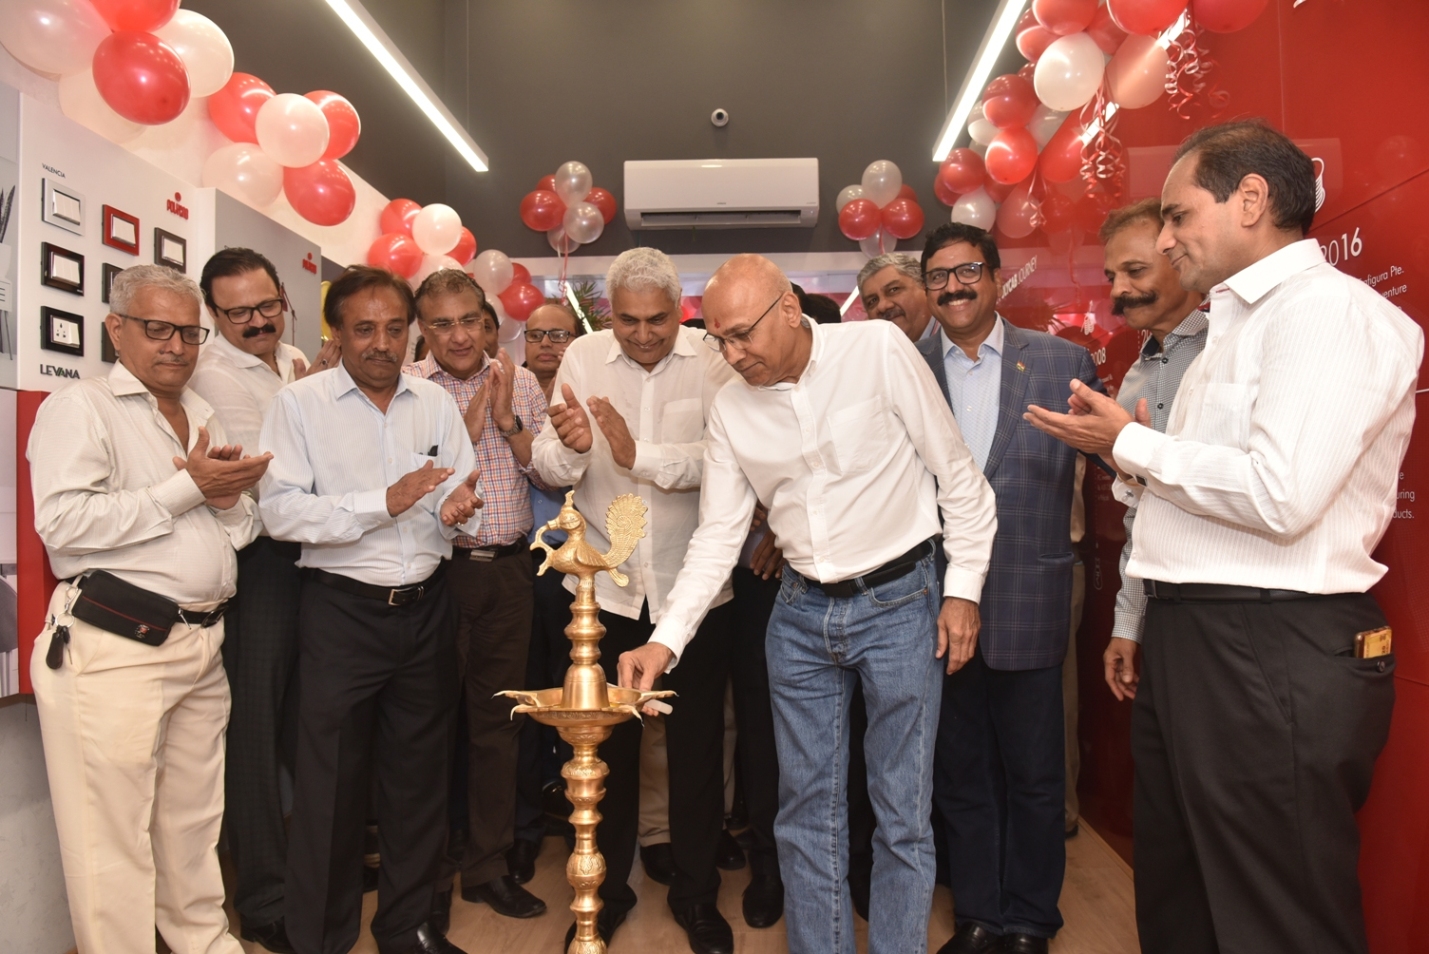 Mr. Inder T. Jaisinghani (CMD, Polycab India Ltd.) lights the lamp to mark an auspicious beginning during the inauguration of their first-ever Polycab Experience Centre in the country at the iconic Lohar Chawl market in Mumbai.- Photo By Sachin Murdeshwar GPN